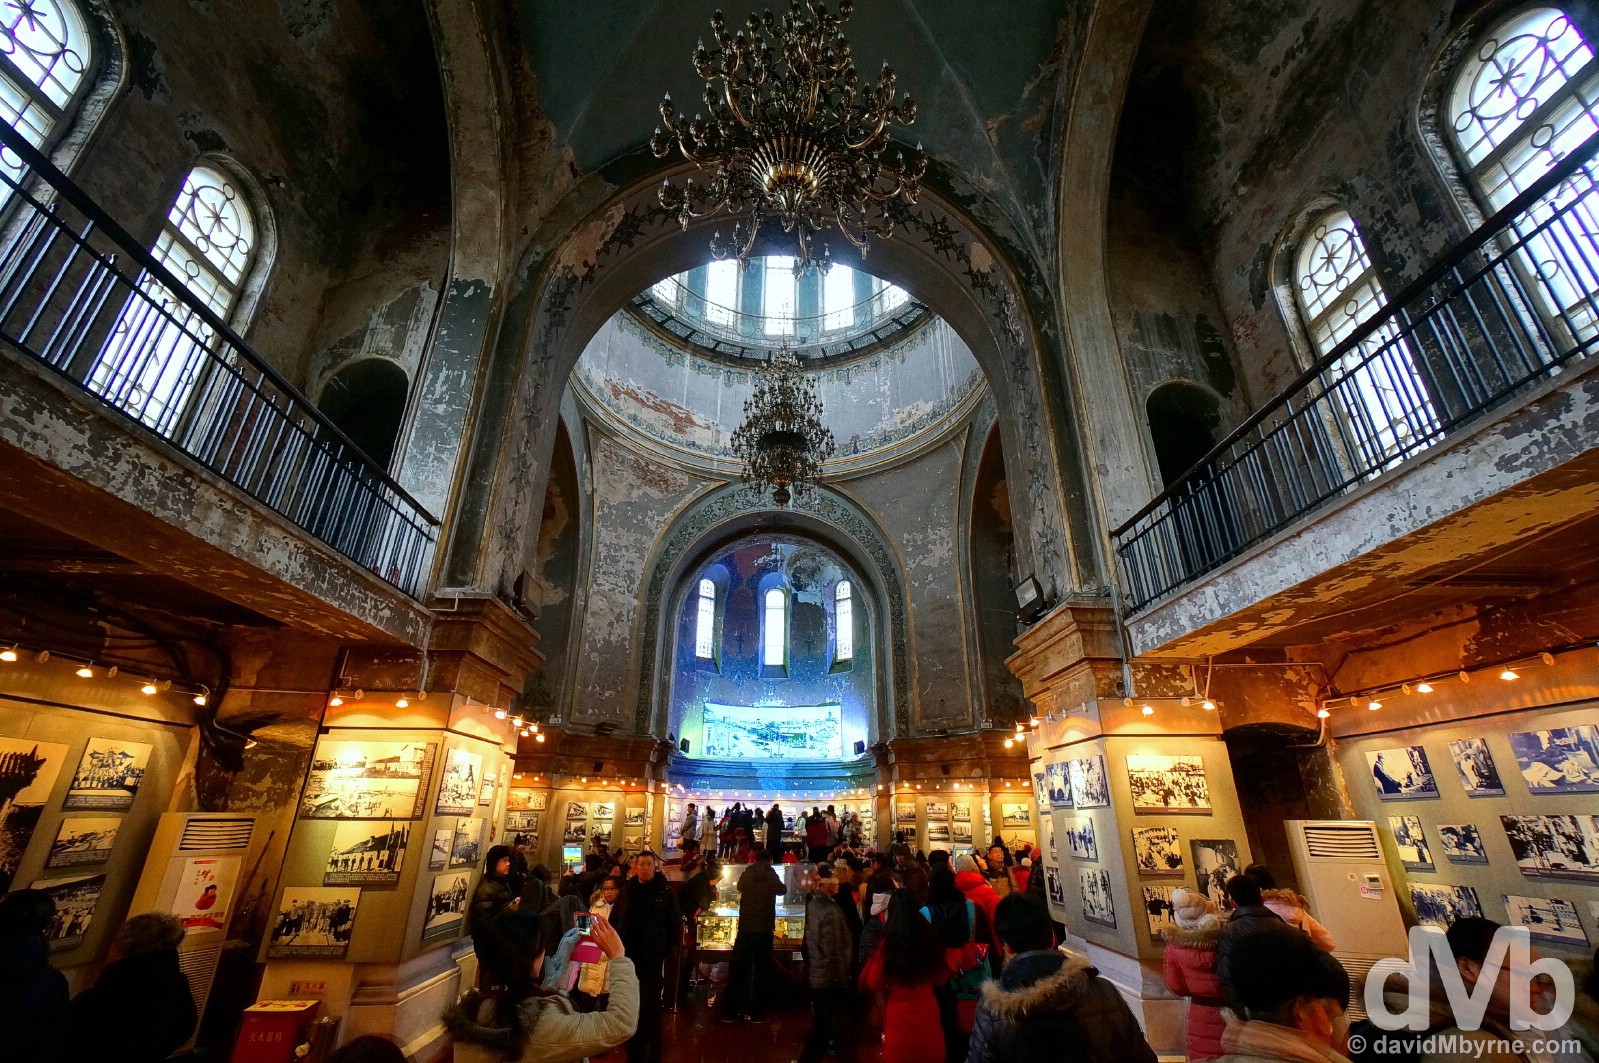 The photography exhibition of the Harbin Art & Architecture Centre inside the 1907 Cathedral of the Holy Wisdom of God, a.k.a. the Russian Orthodox cathedral or formally St. Sofia's, in central Harbin, China. February 6, 2015.